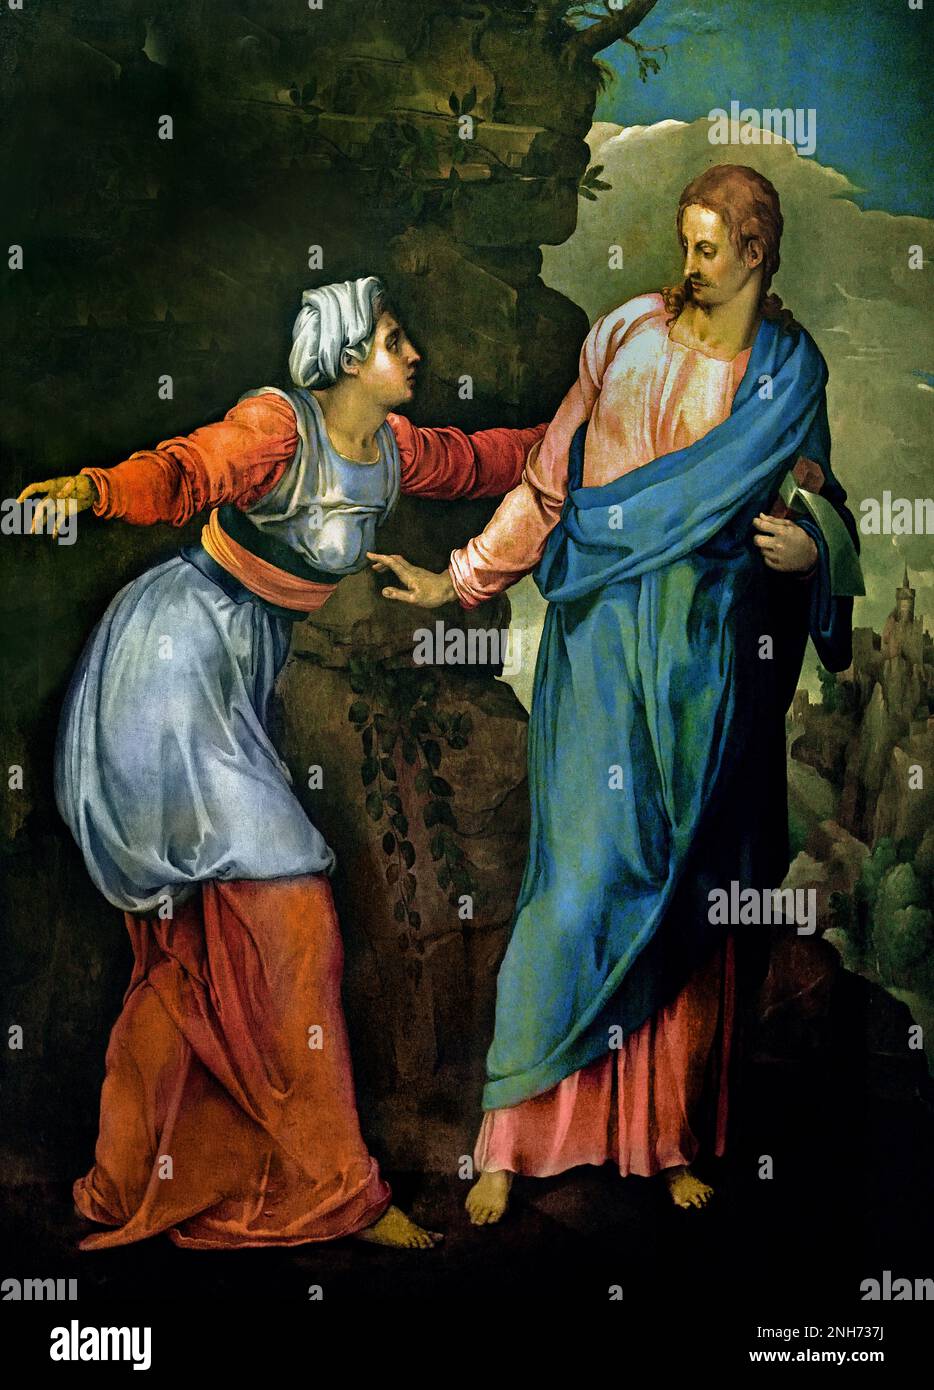 Noli me tangere. Painting by Pontormo, after 1531, based on a drawing by Michelangelo Buonarroti. Casa Buonarroti in Florence Jacopo Carucci (May 24, 1494 – January 2, 1557), usually known as Jacopo da Pontormo, Jacopo Pontormo, or simply Pontormo, Casa Buonarroti memory celebration genius of Michelangelo,  Fine Art Museum, Italy, Italian, Stock Photo